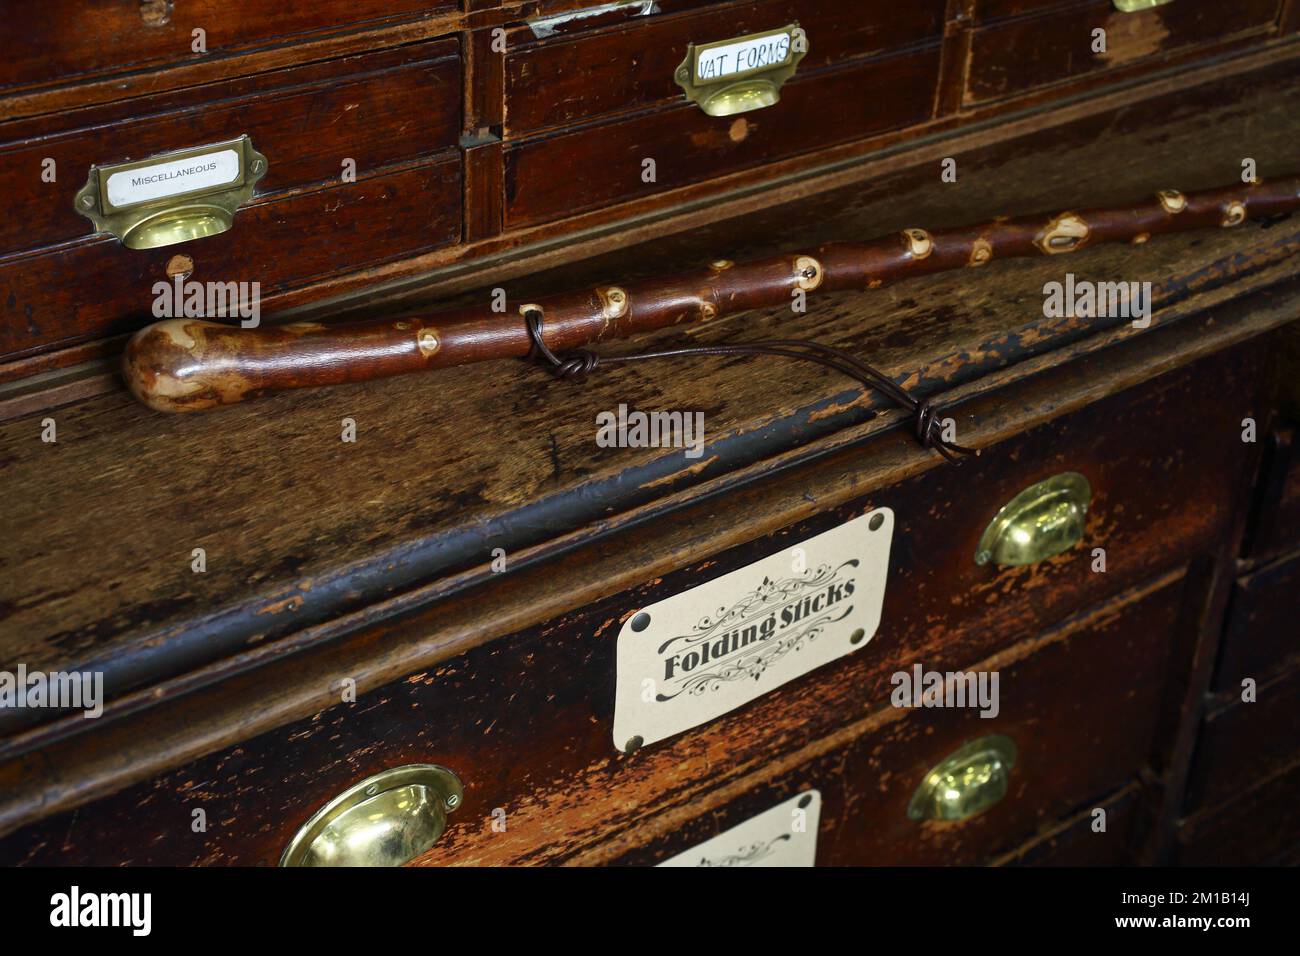 Walking stick on antique drawer at The James Smith & Son umbrella shop on New Oxford Street Stock Photo